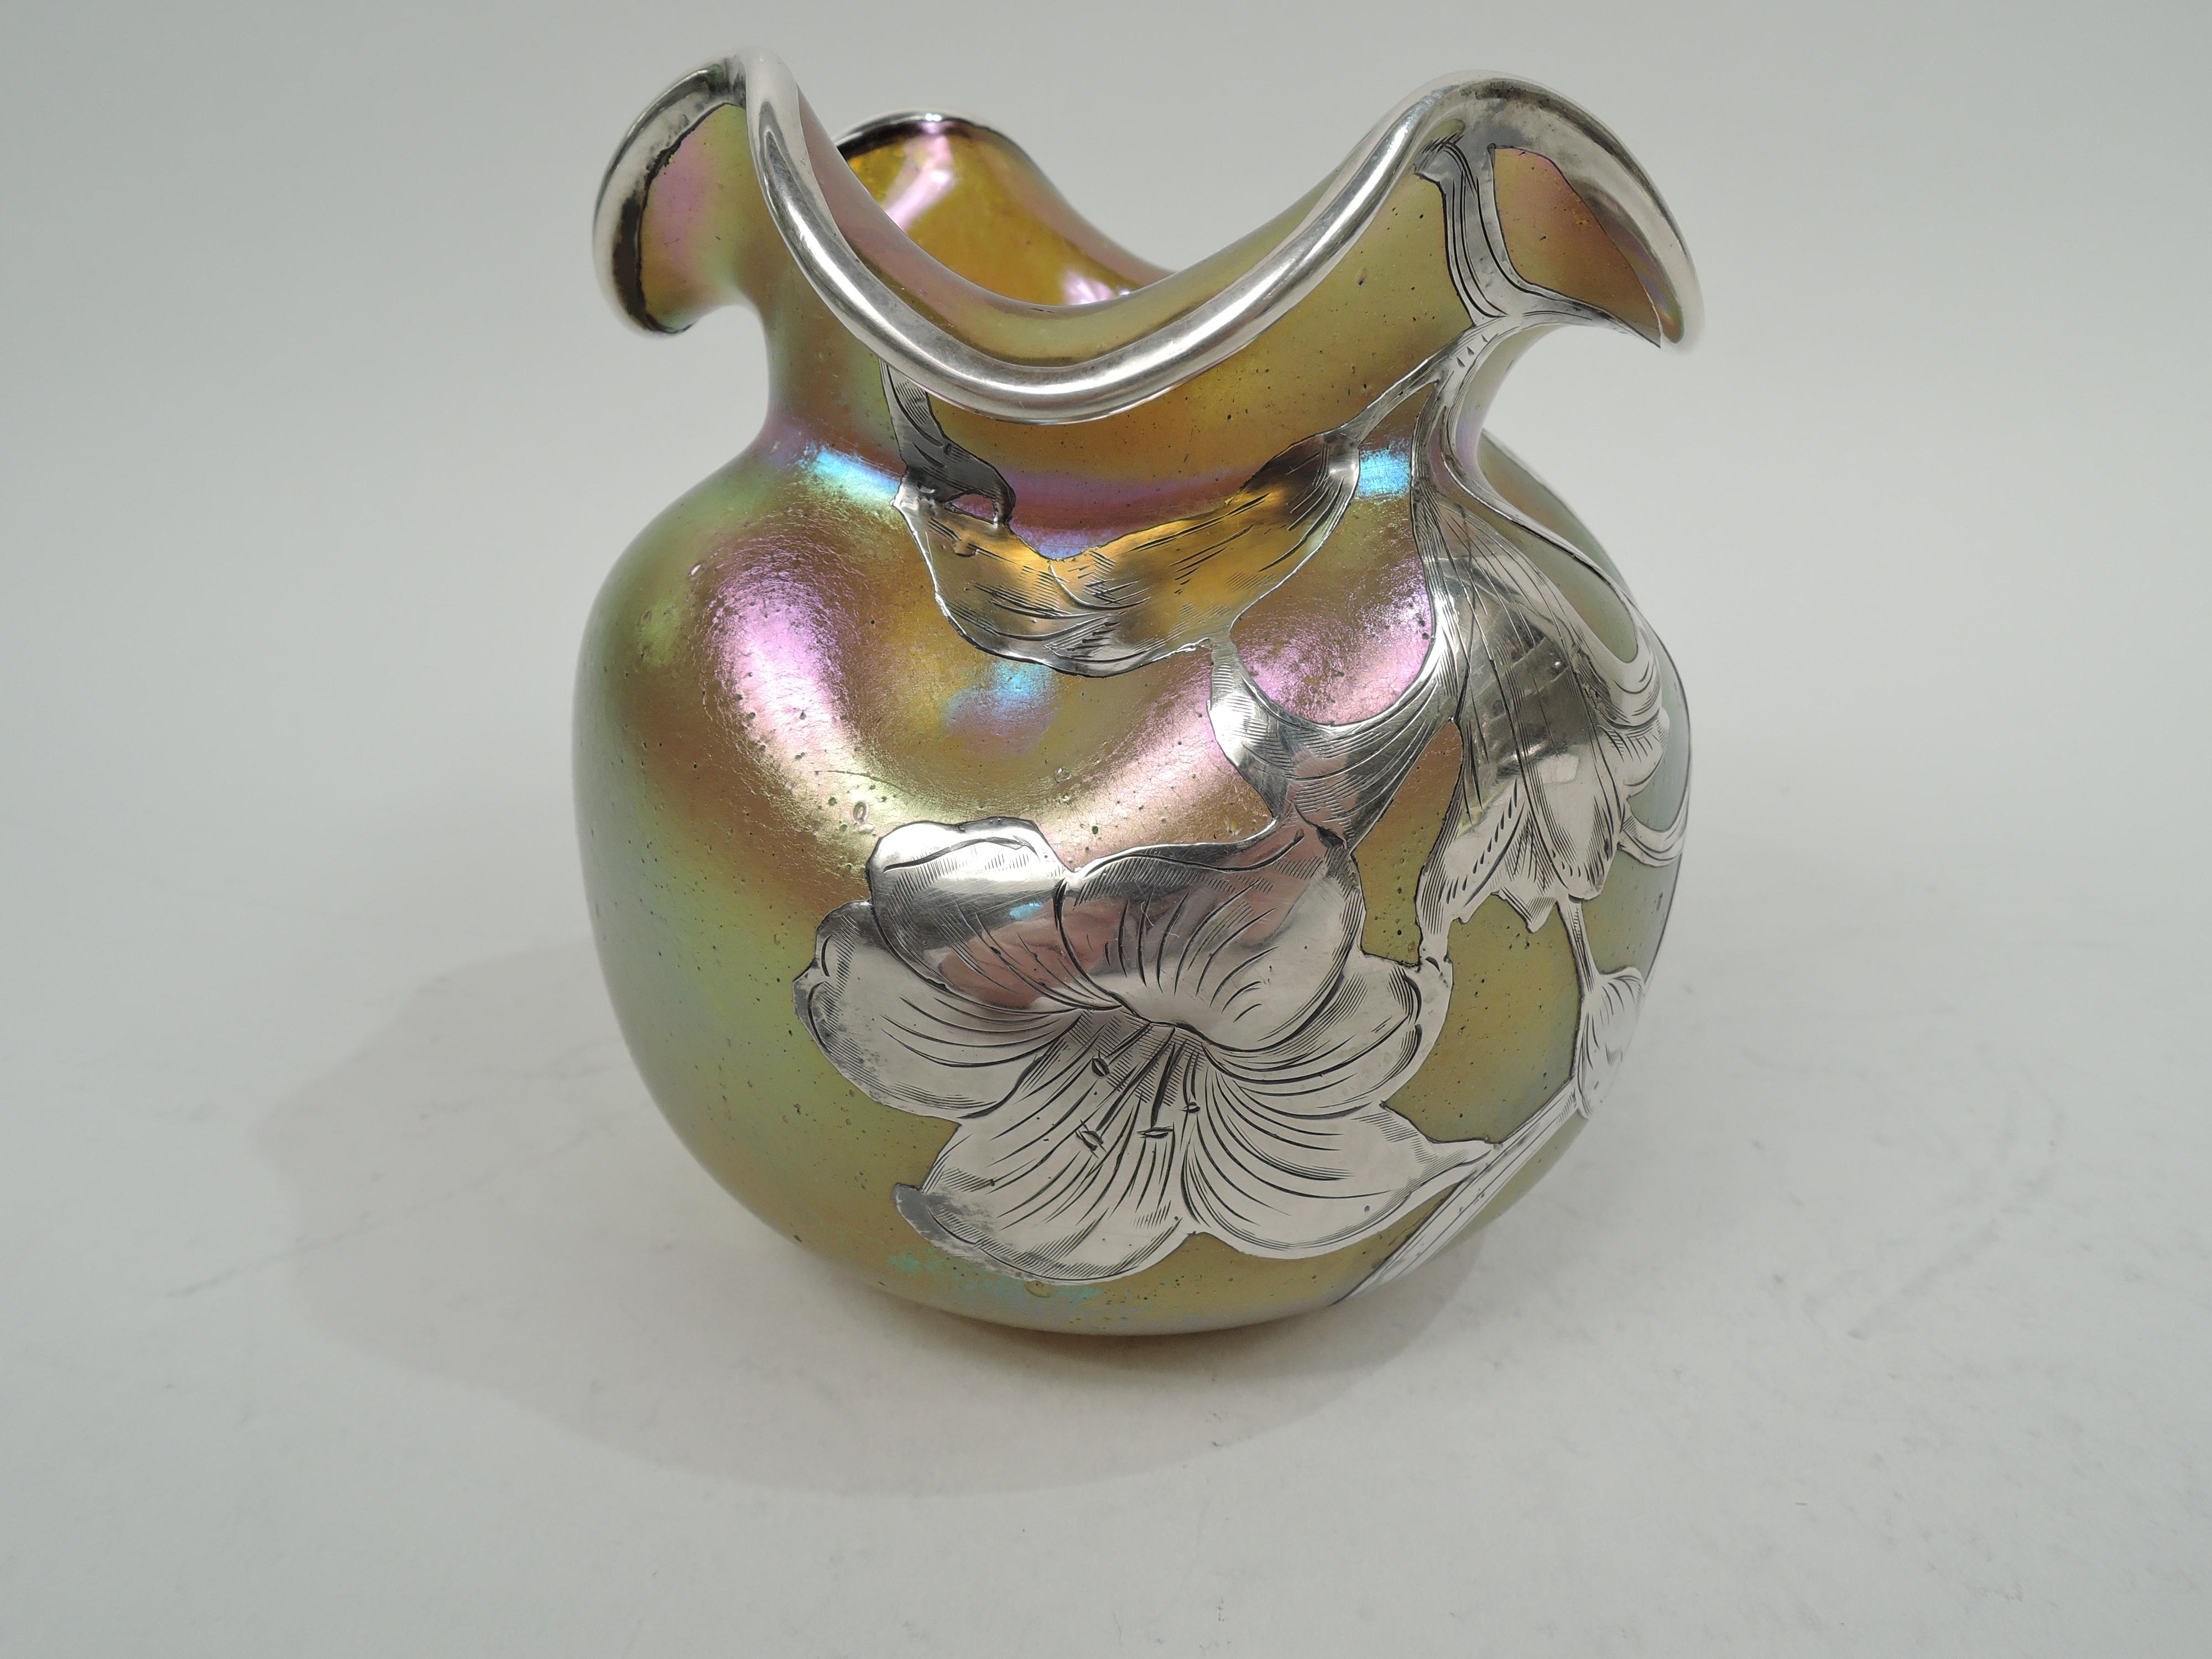 Silberiris glass vase by historic Loetz with engraved silver overlay. Globular with pinched shoulder and ruffled turned-down quatrefoil rim. On front overlay in form of loose and fluid blooms on entwined and whiplash stems. Back plain. Glass